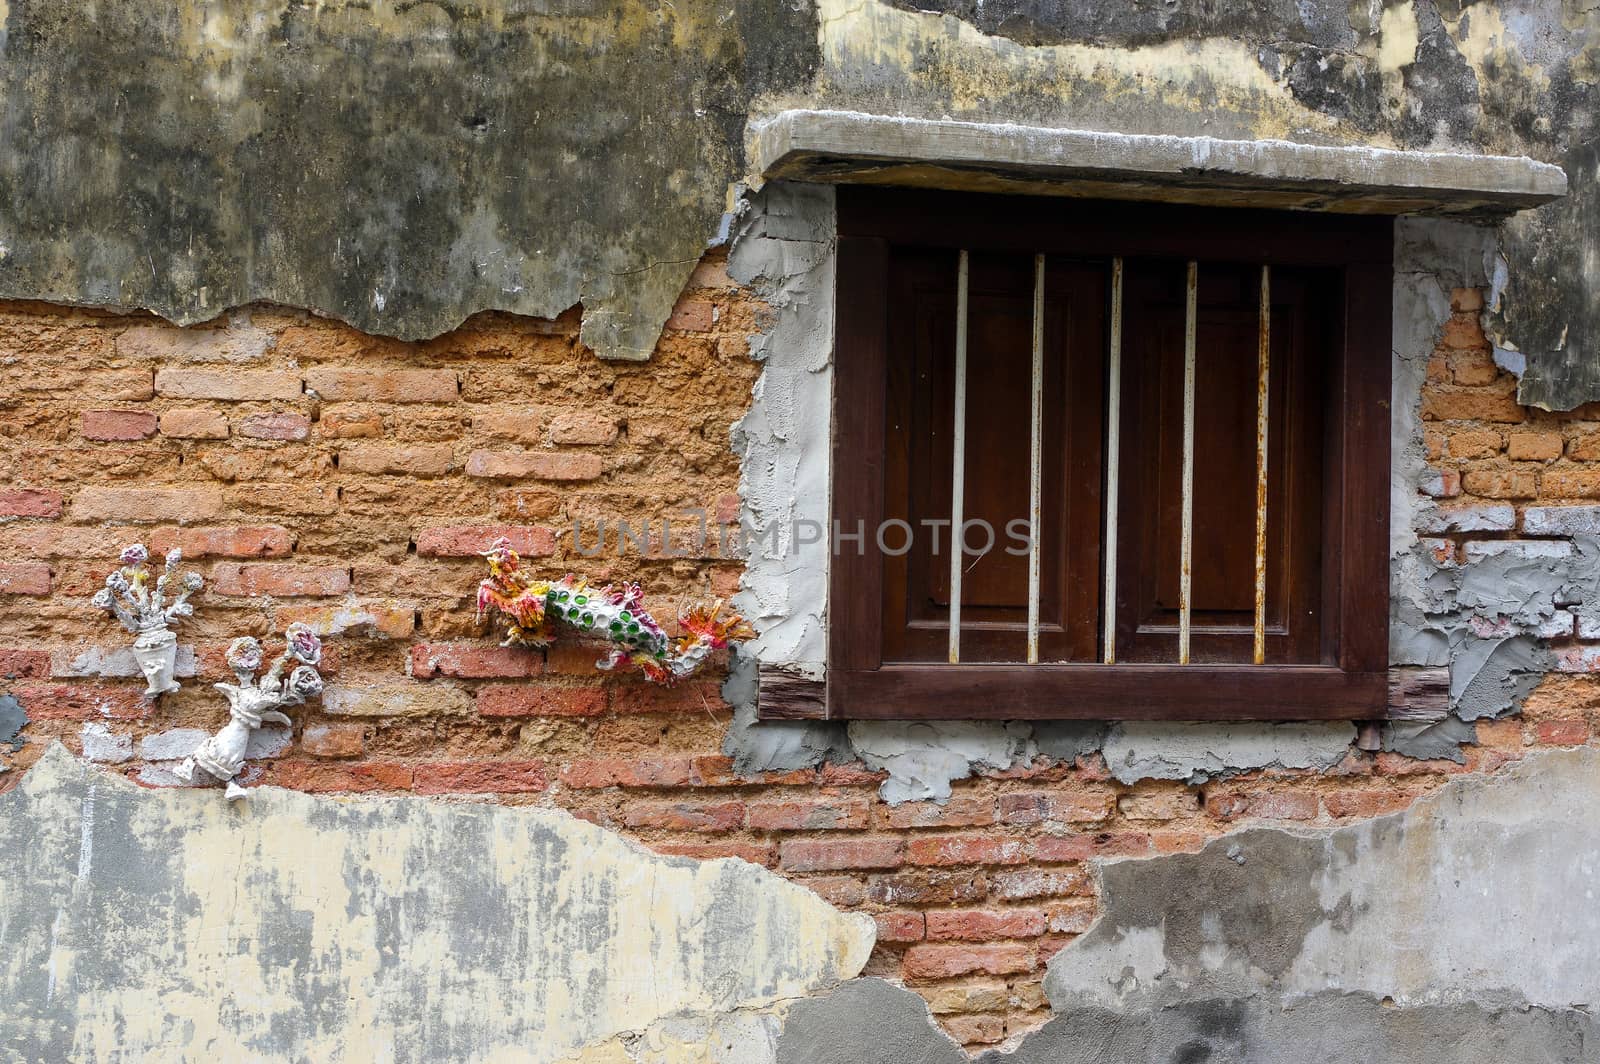 Georgetown, Penang, Malaysia - April 18, 2016: old brick wall with a wooden window